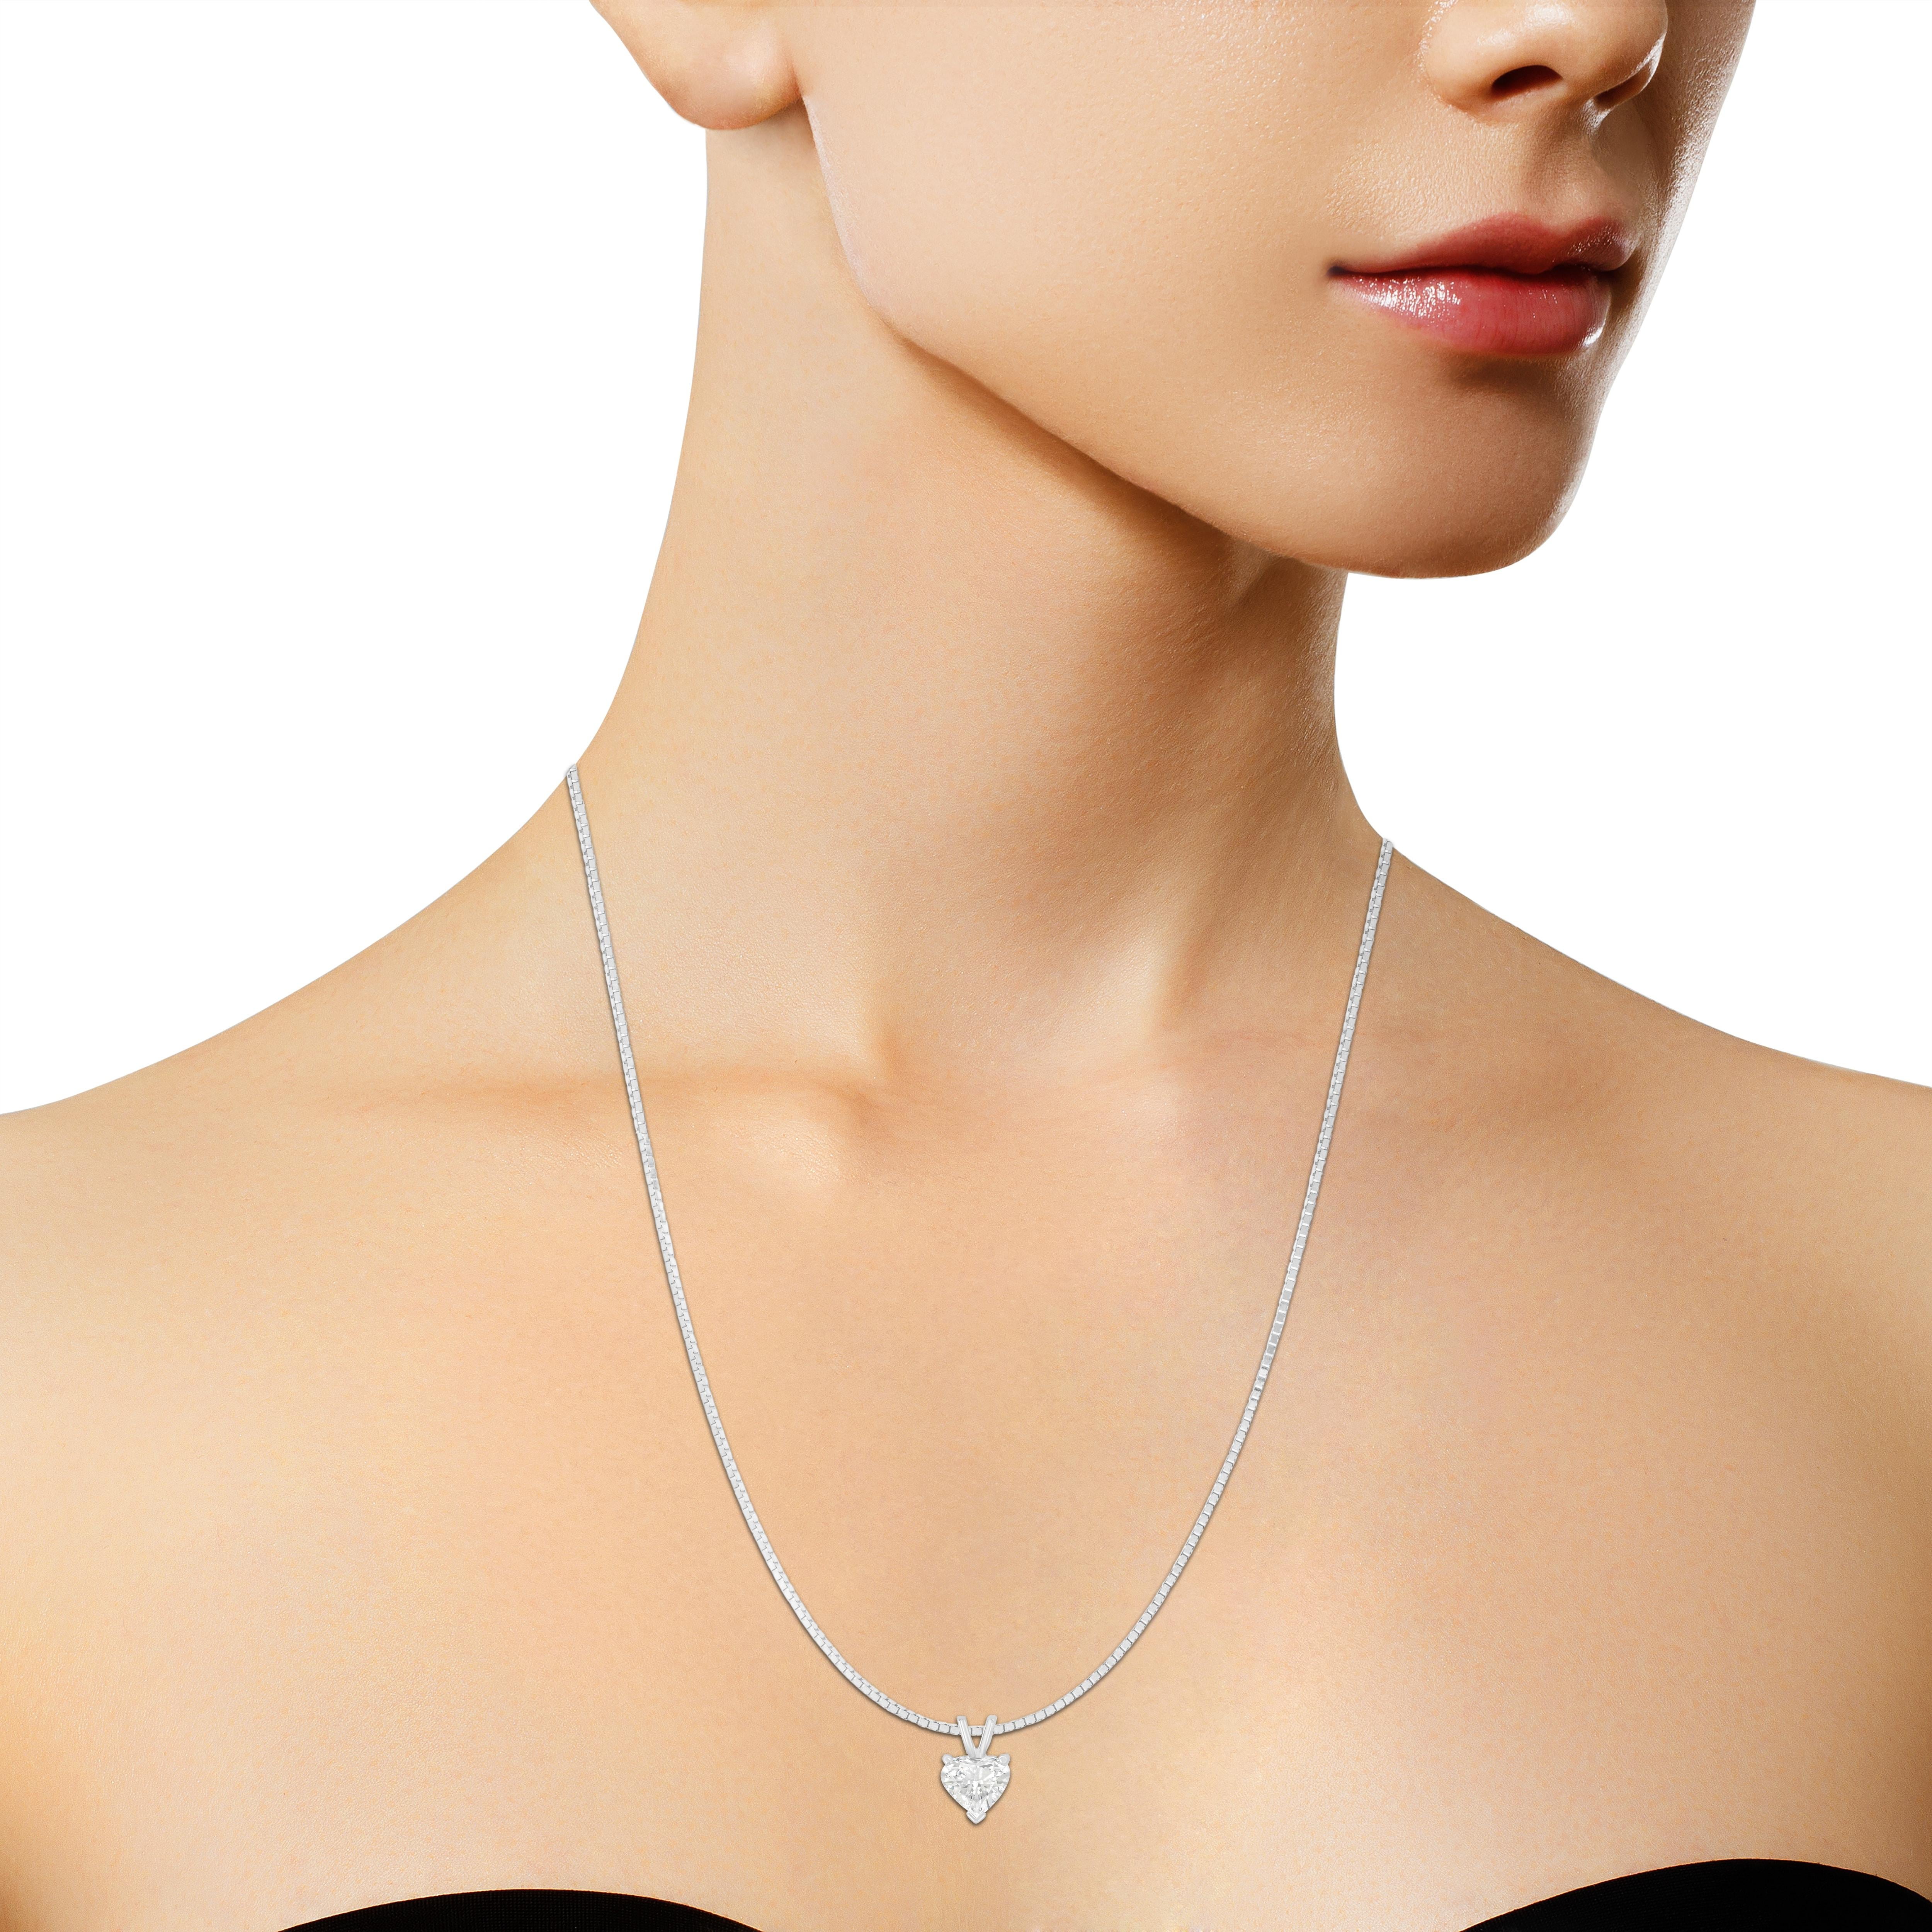 Your loved one will obsess over this gorgeous solitaire pendant. This 14k white gold necklace boasts a single heart-shaped diamond with a total carat weight of 1/2 cttw. Embellished in a 3 prong setting, the diamond shines and will dazzle on your